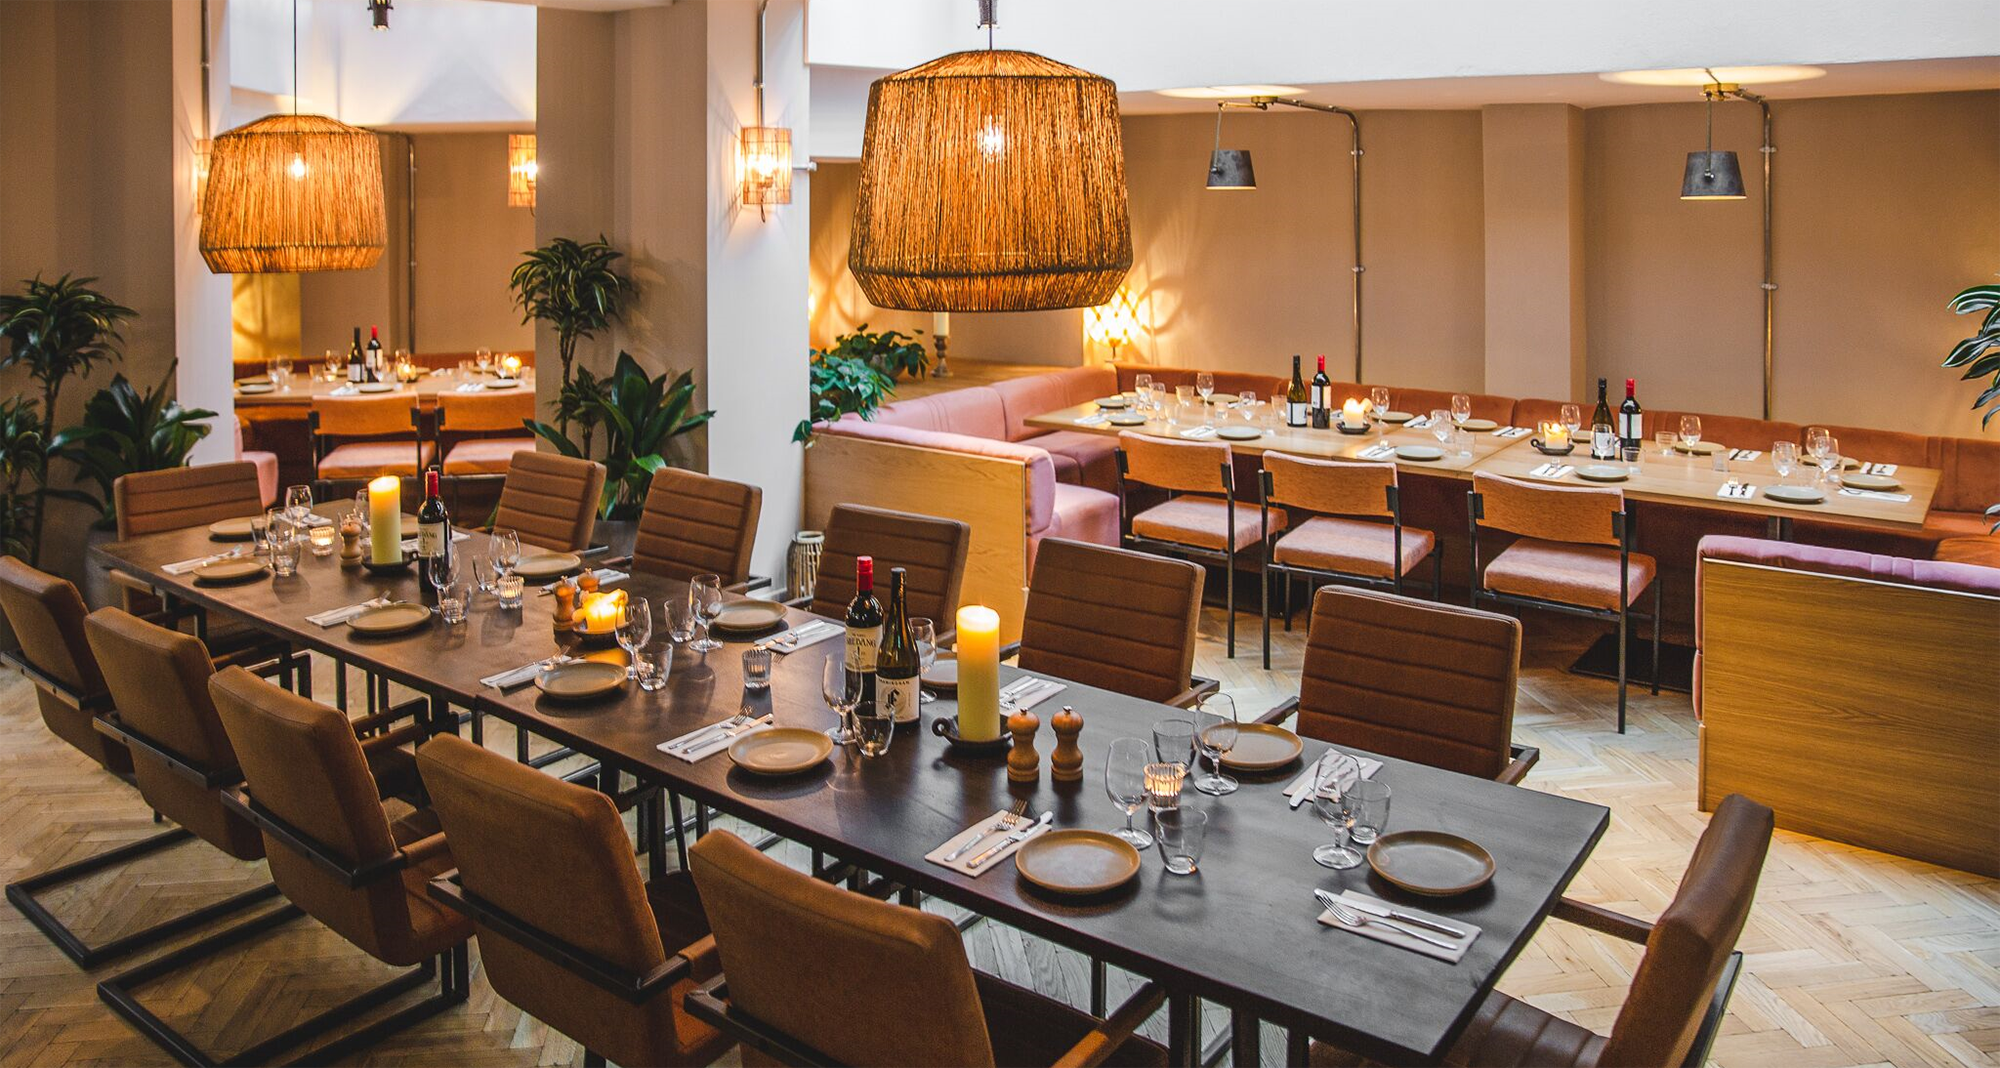 Caravan Restaurants Private Dining | Fitzroiva Record Room - Private Dining Room